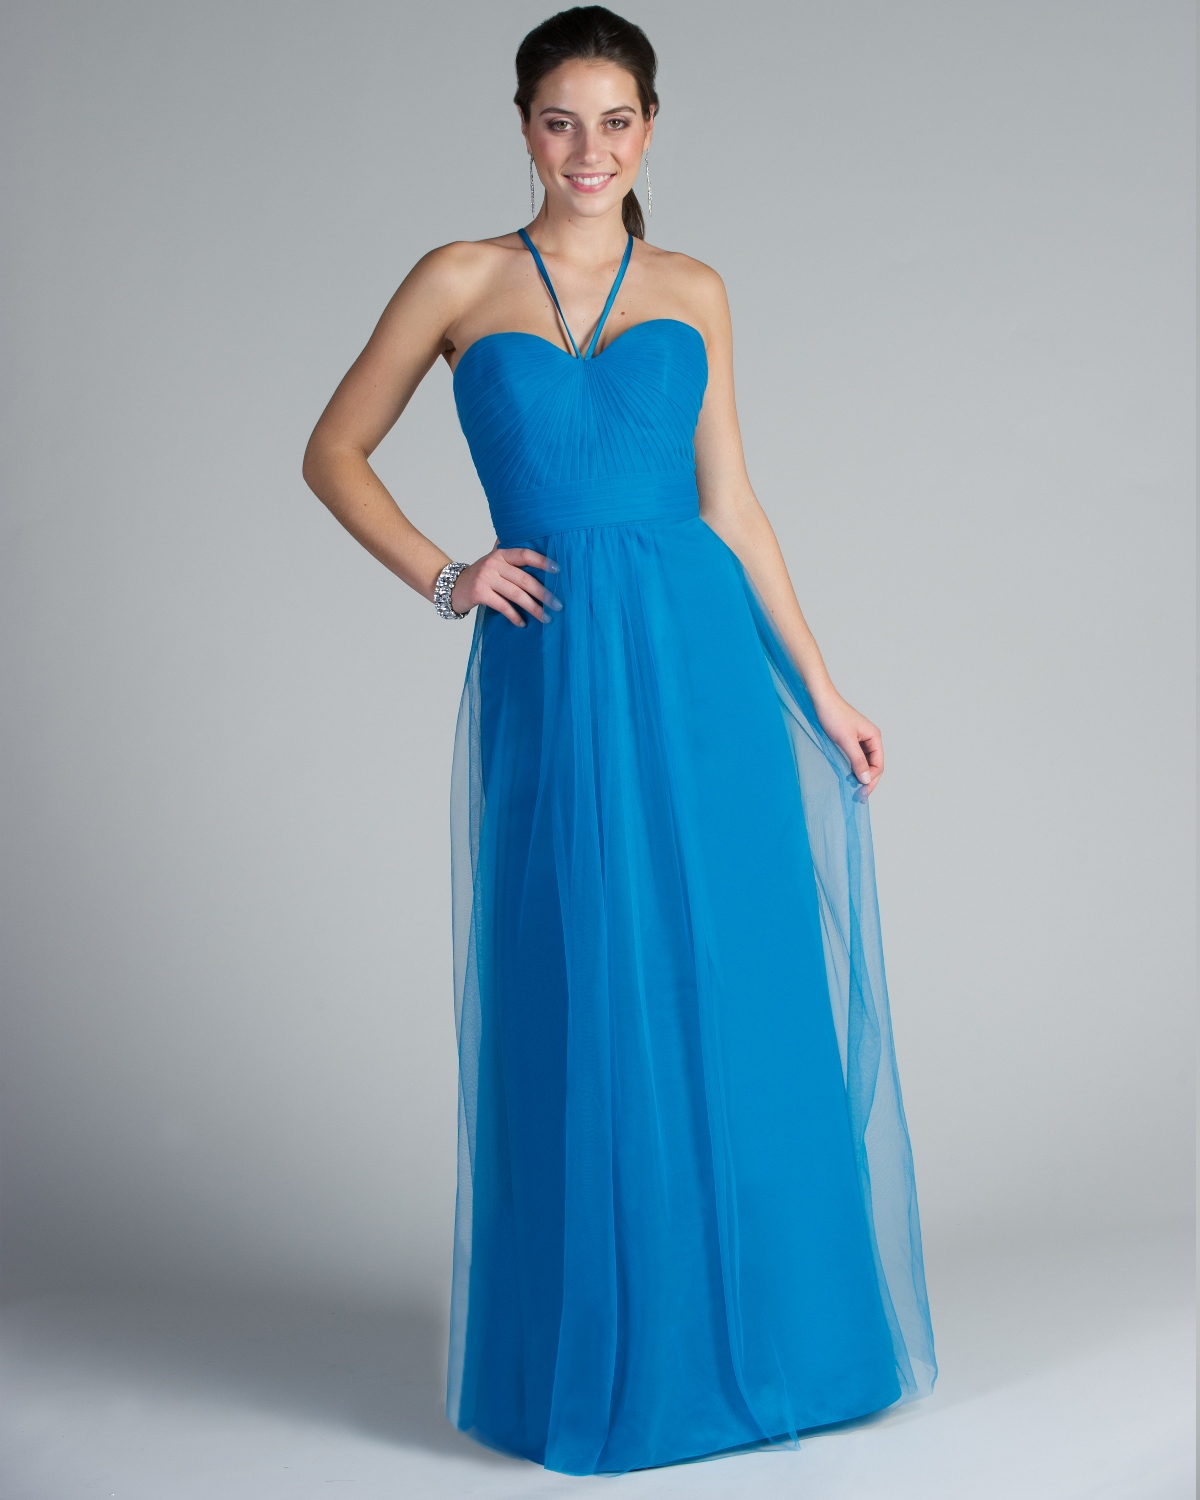 Bridesmaid Dress - Tutto Bene Collection: 2206 - Shown in Blue soft ...